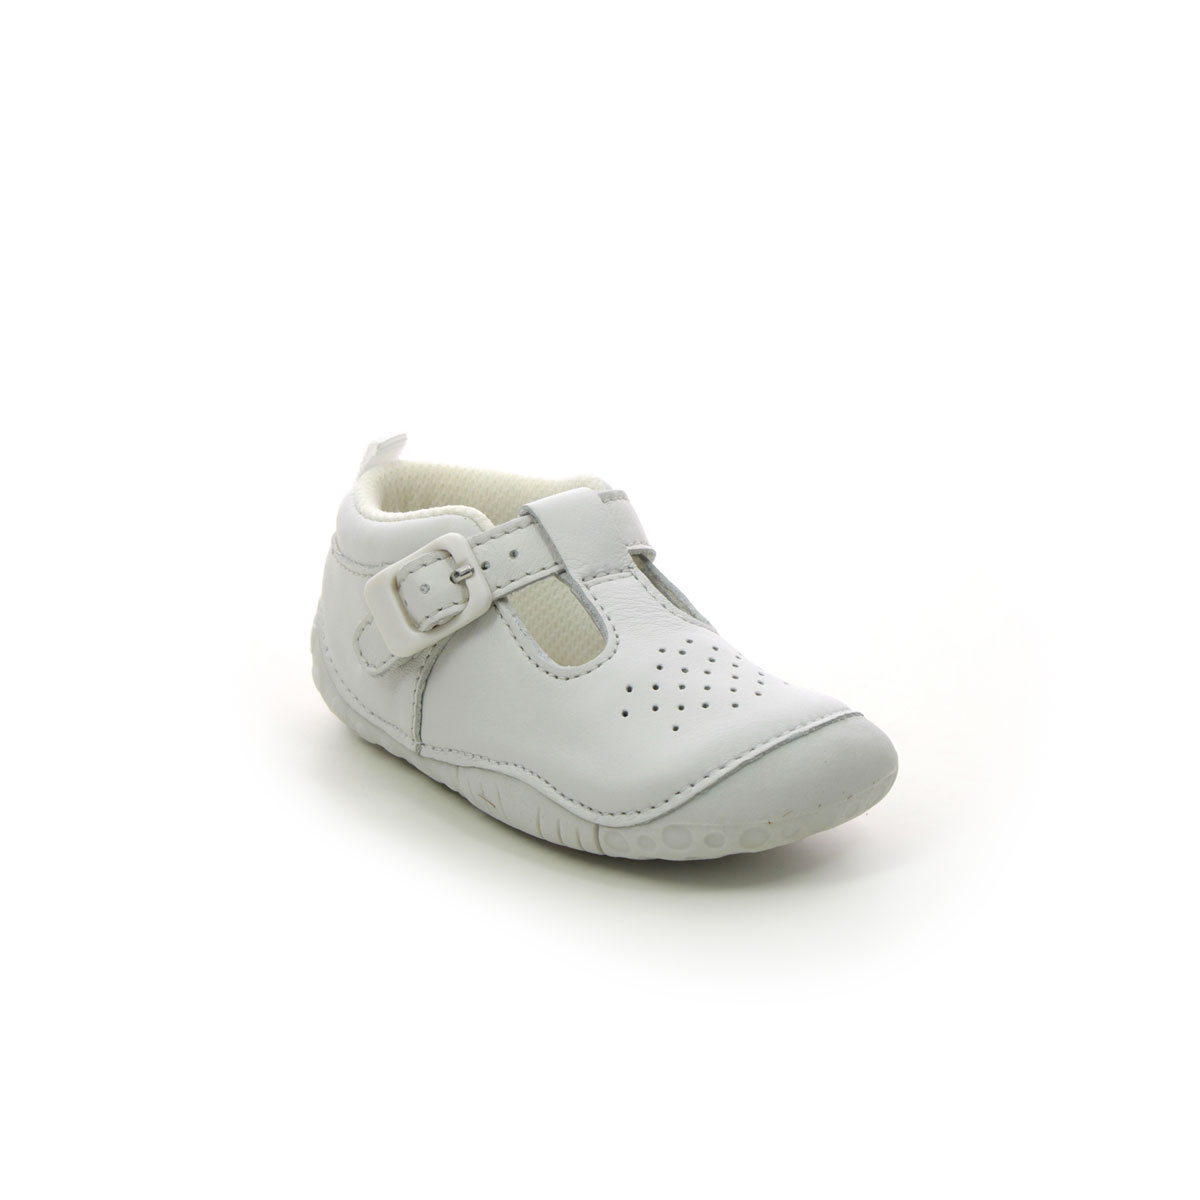 Start Rite Baby Jack White Leather Kids girls first and baby shoes 0746-76F in a Plain Leather in Size 3.5